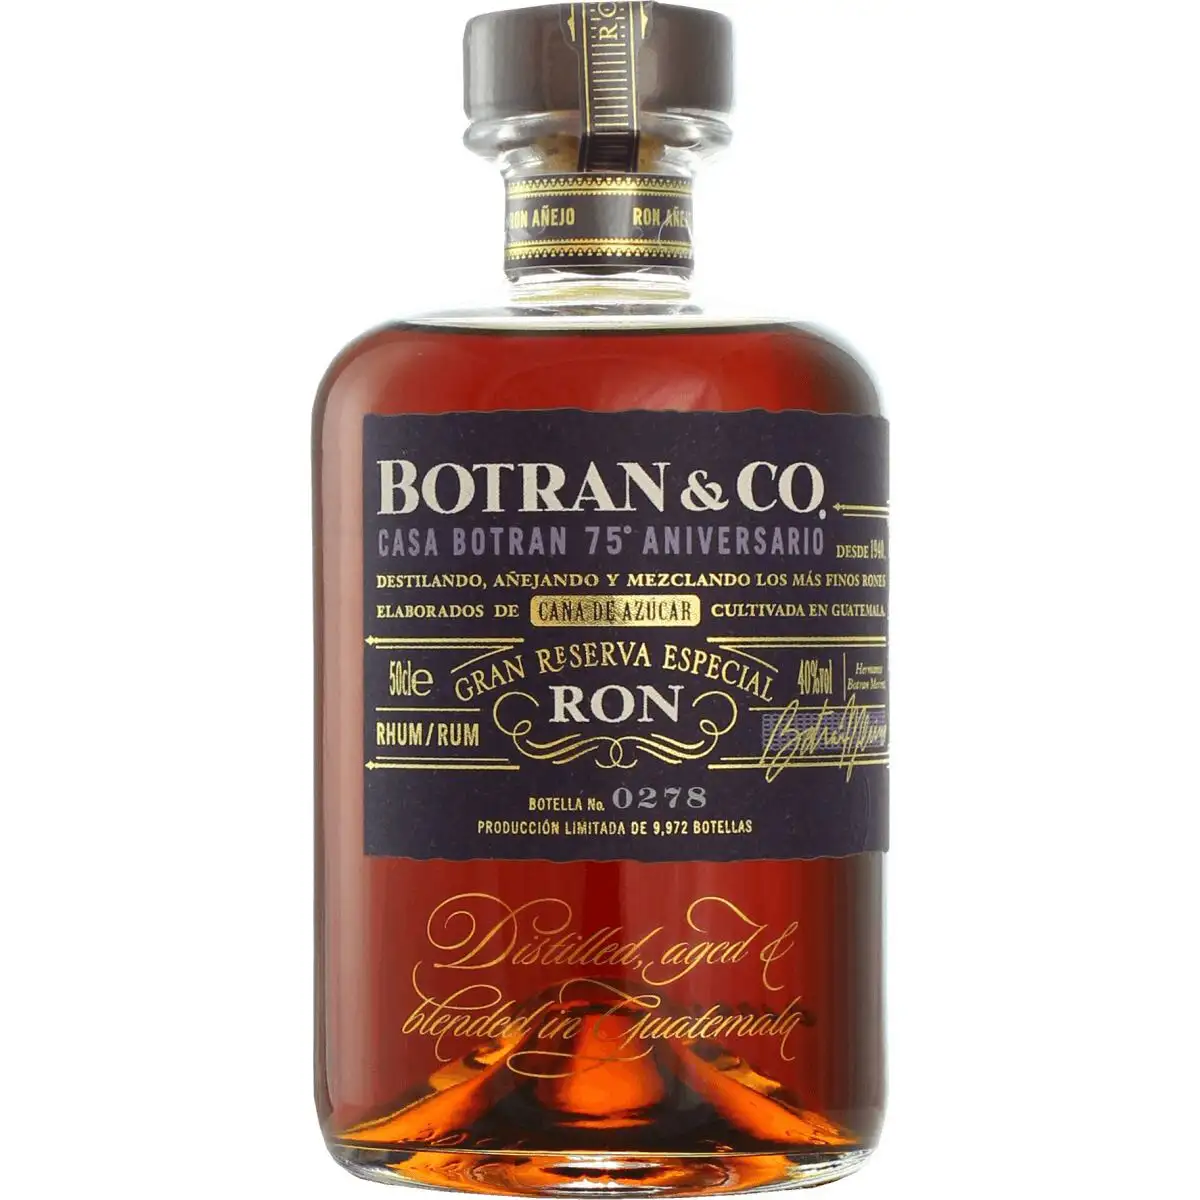 Image of the front of the bottle of the rum Botran Casa Botran 75 Aniversario